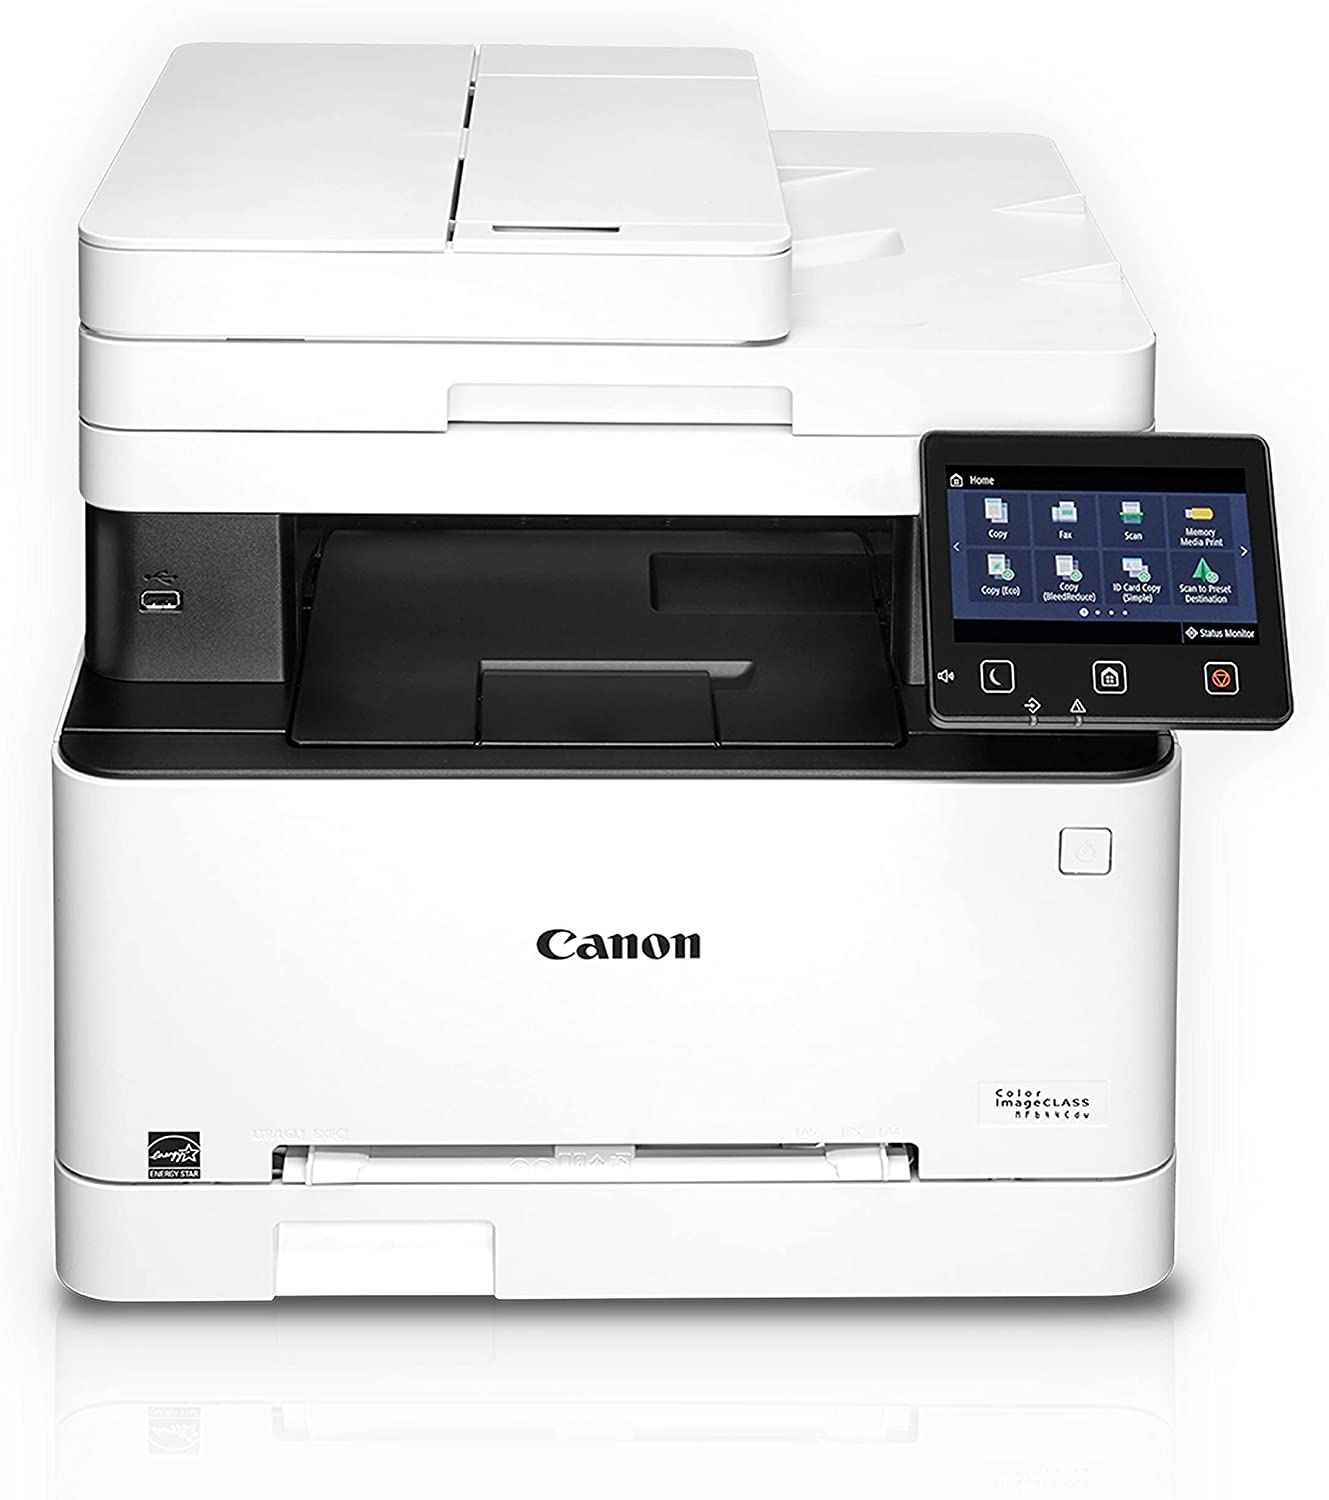 The NetDigz Editors rate the Canon MF644Cdw as the Best Premium Laser Printer.